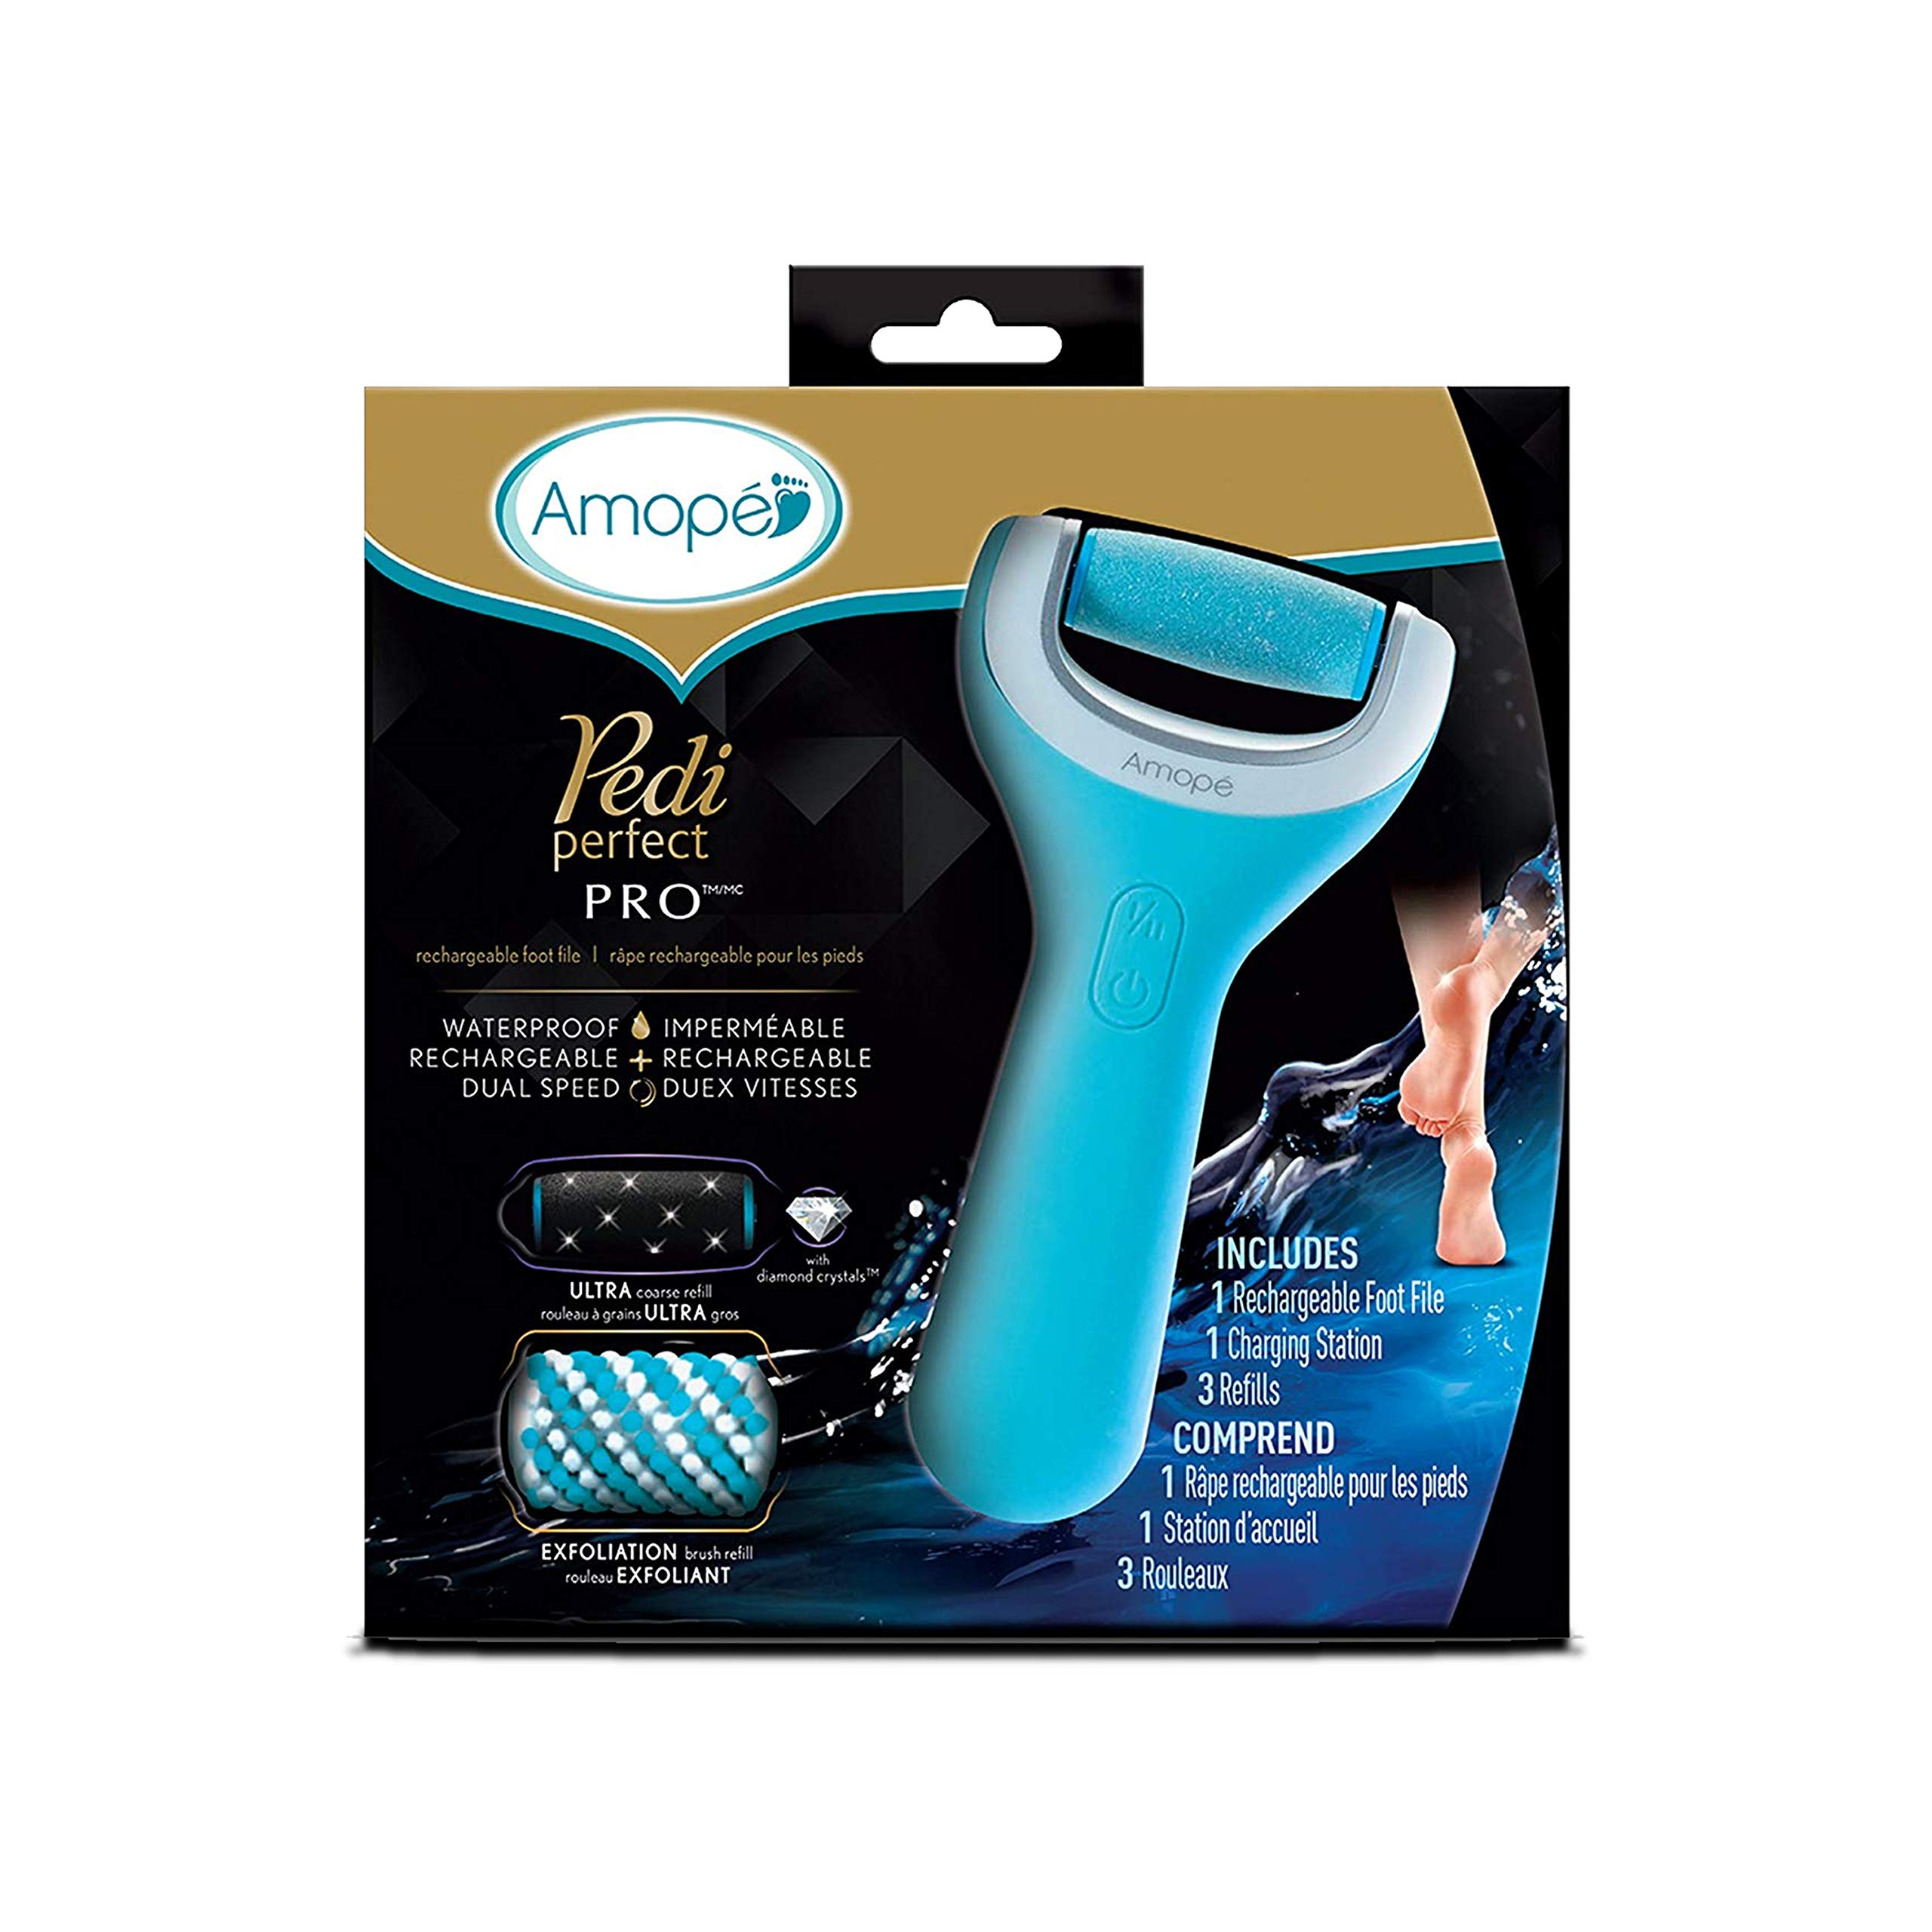 Amope Pedi Perfect Wet & Dry Foot File, Callous Remover for Feet, Hard and Dead Skin - Rechargeable & Waterproof (Packaging May Vary)